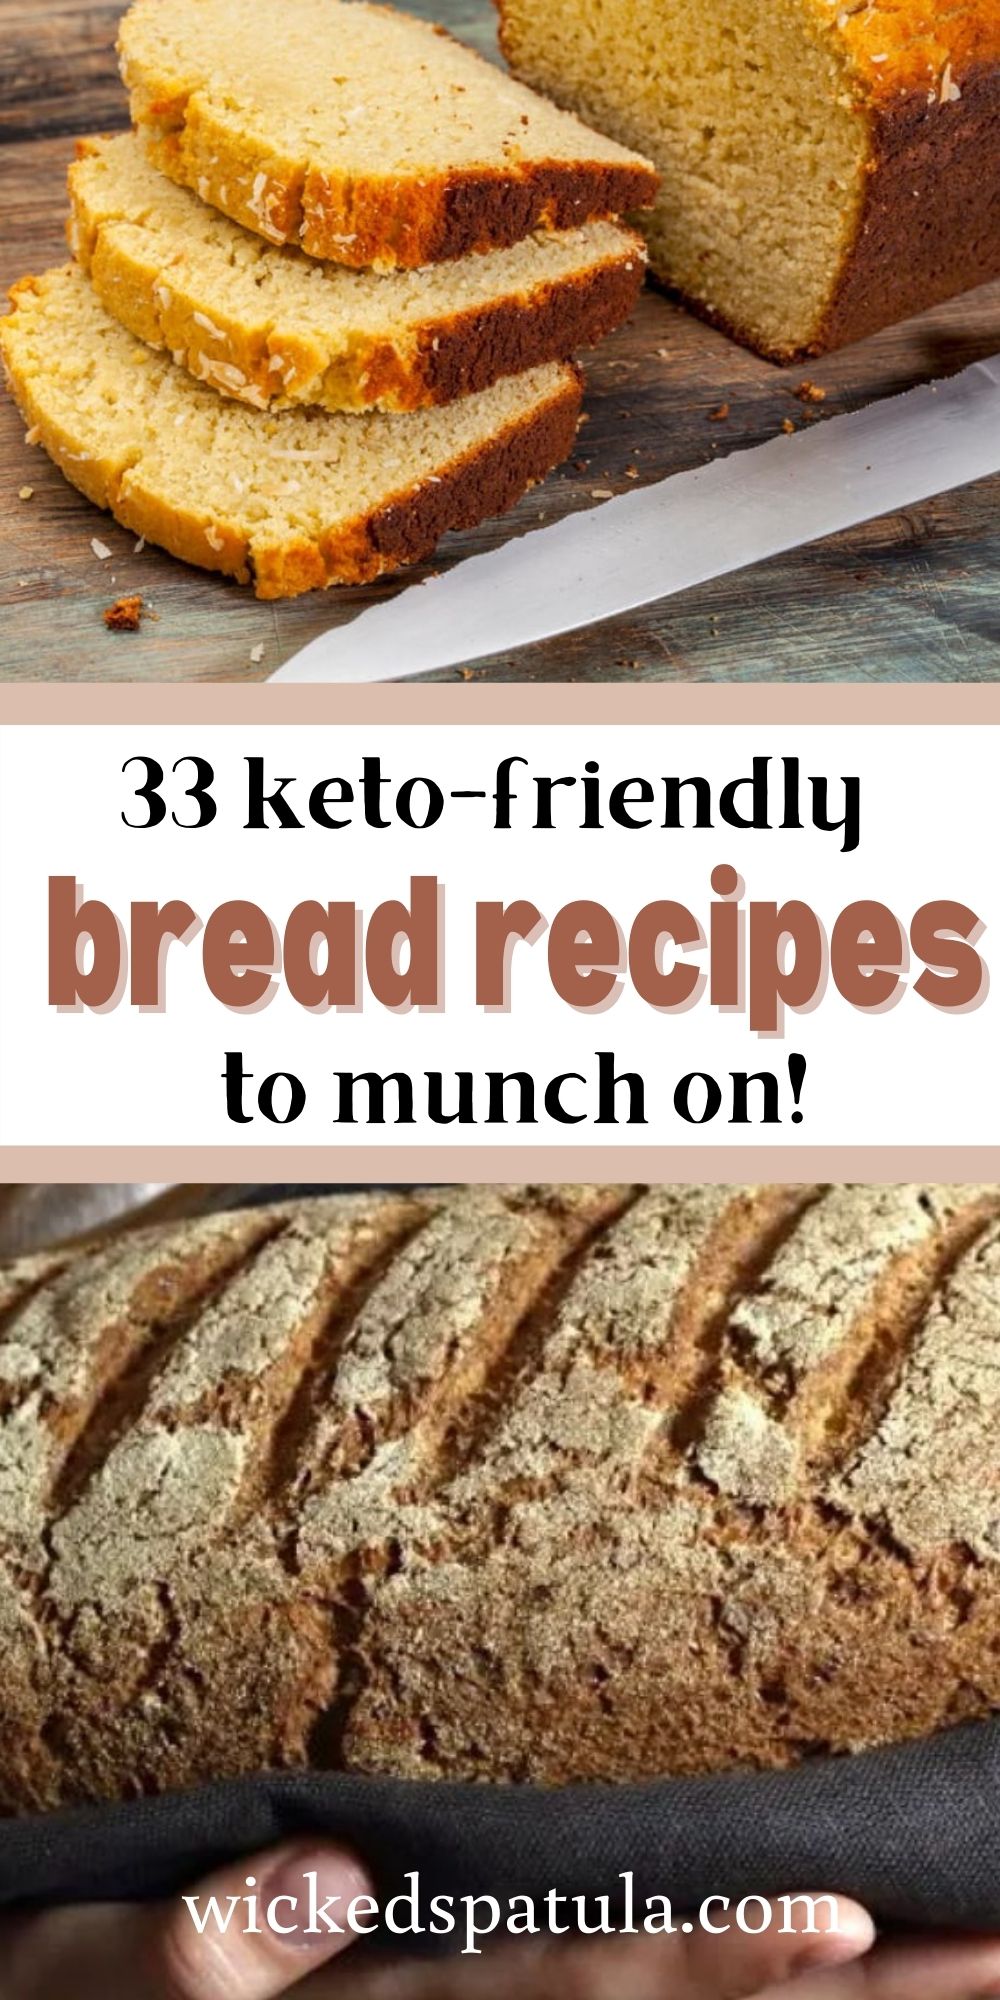 30 Keto-Friendly Bread Recipes Perfect for Sandwiches and More